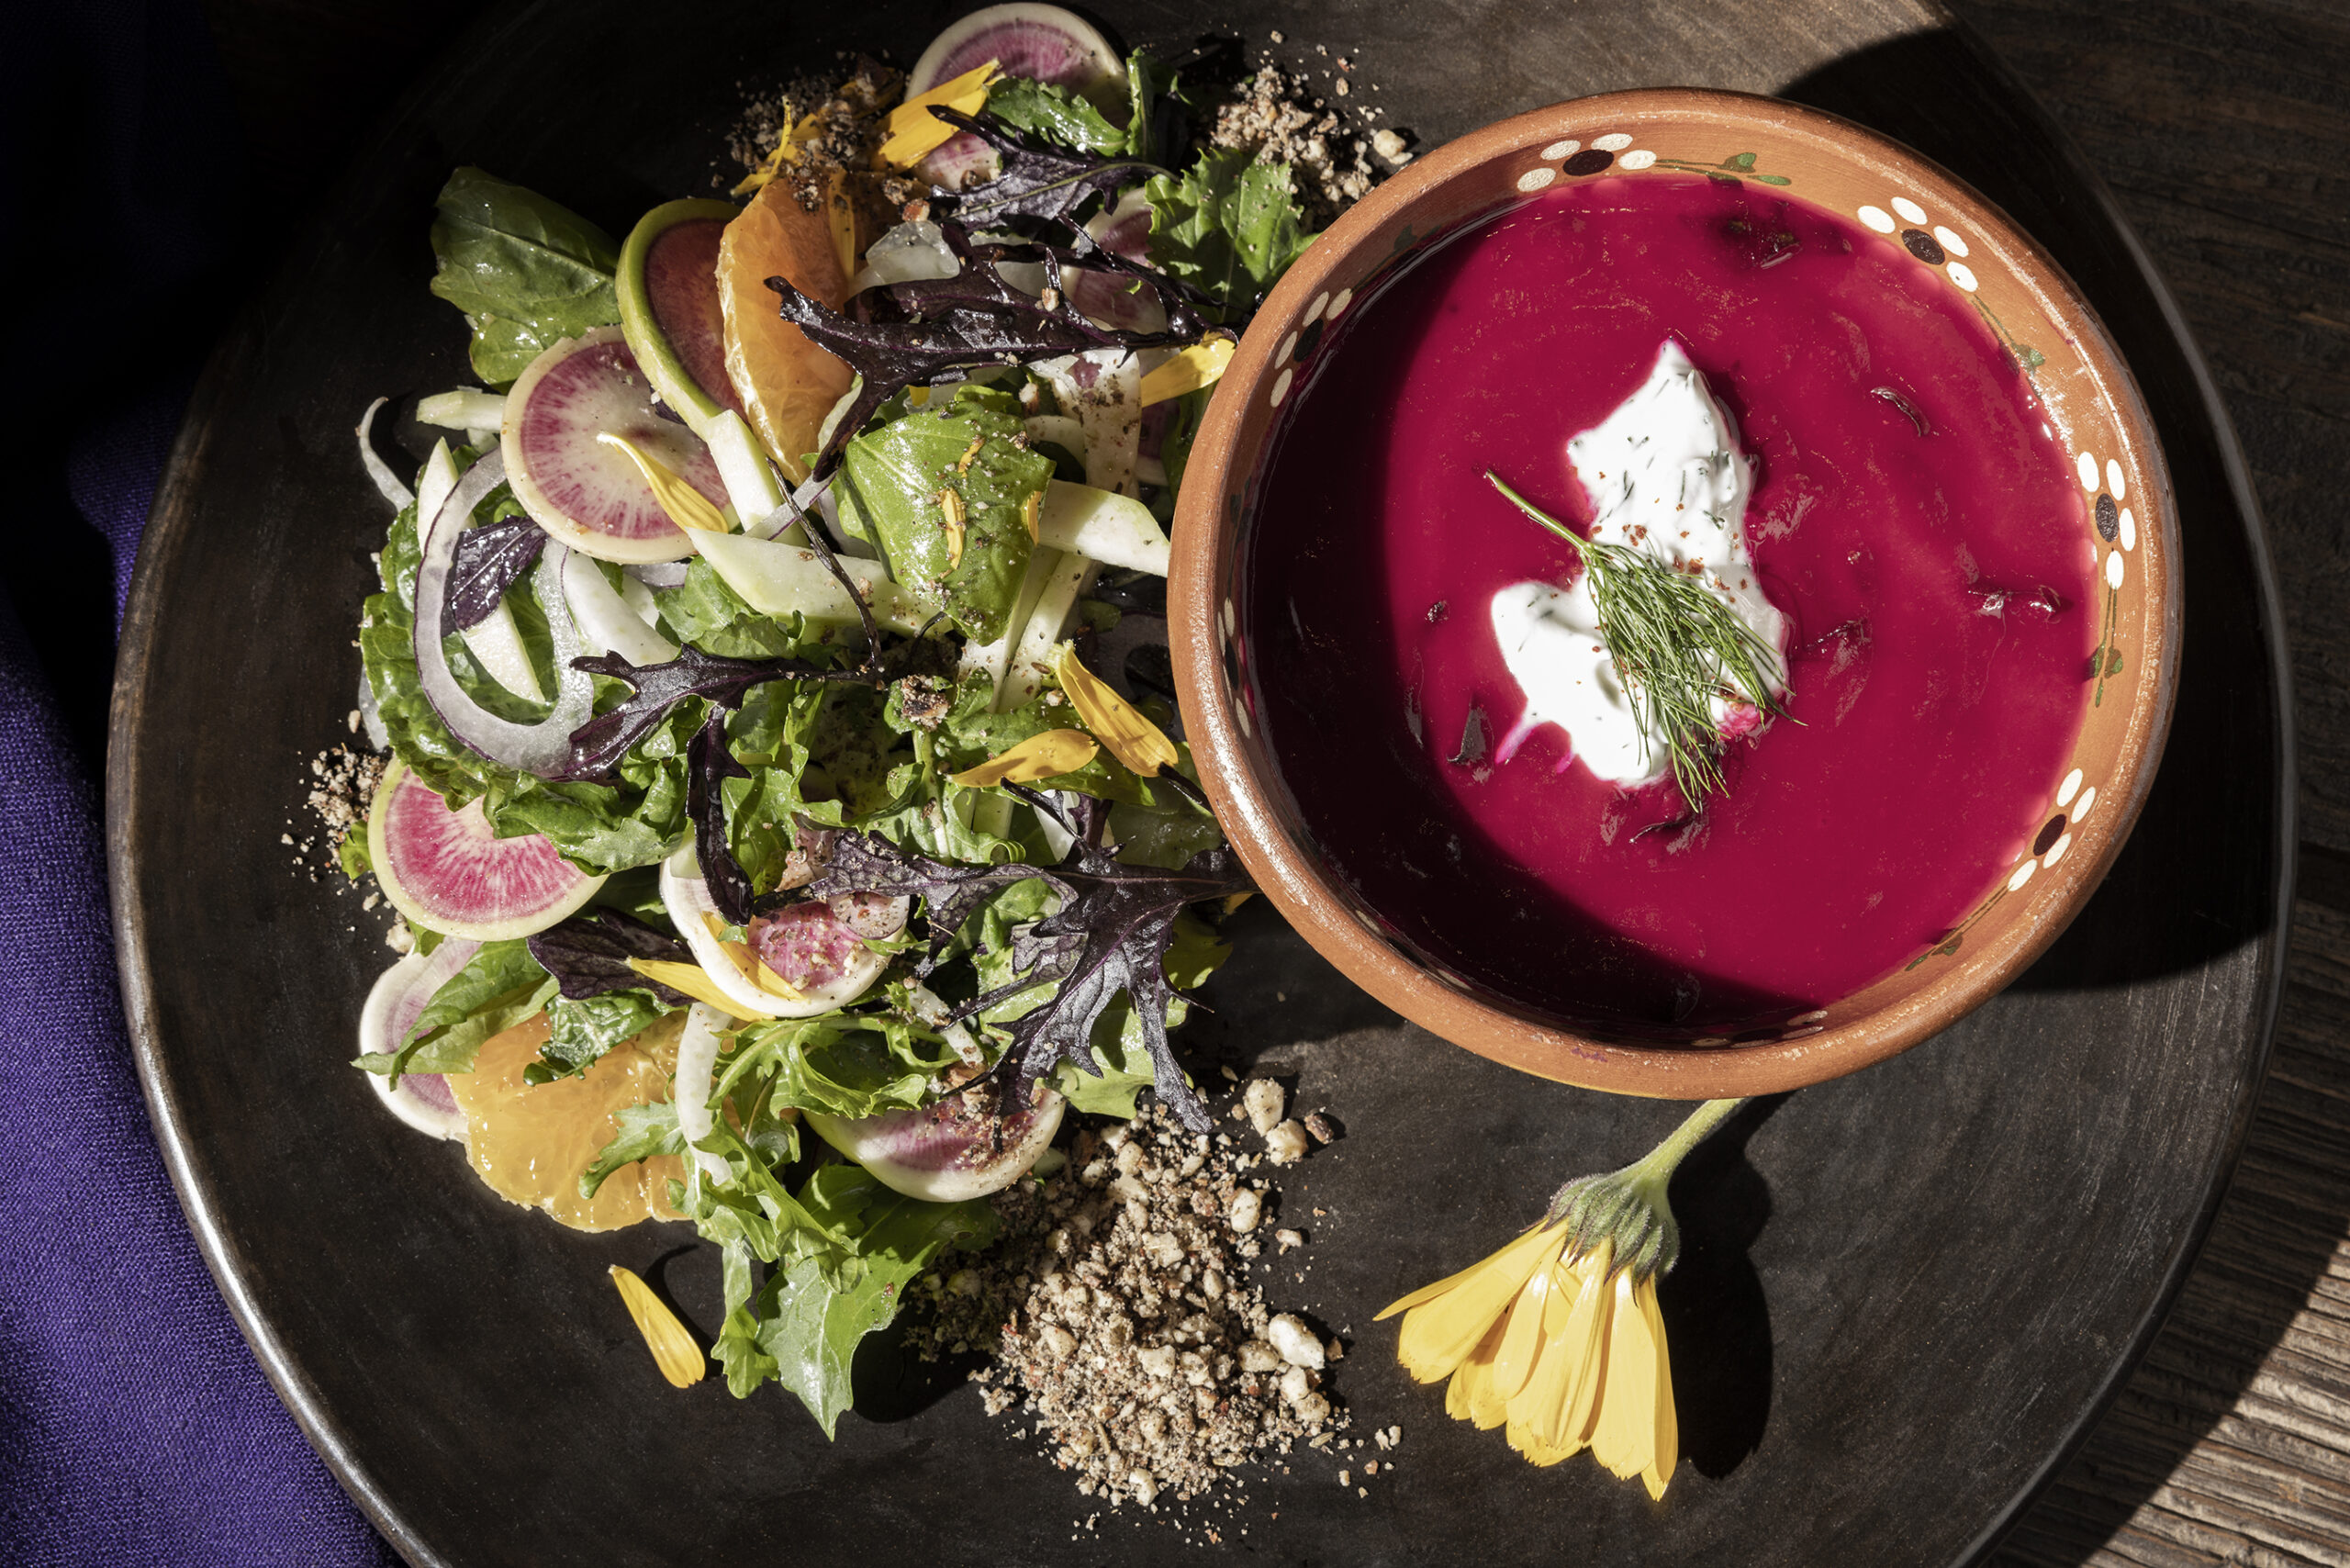 Whole-Beet and Parsnip Borscht with Dukkah from visiting teacher Jeanne Kelley